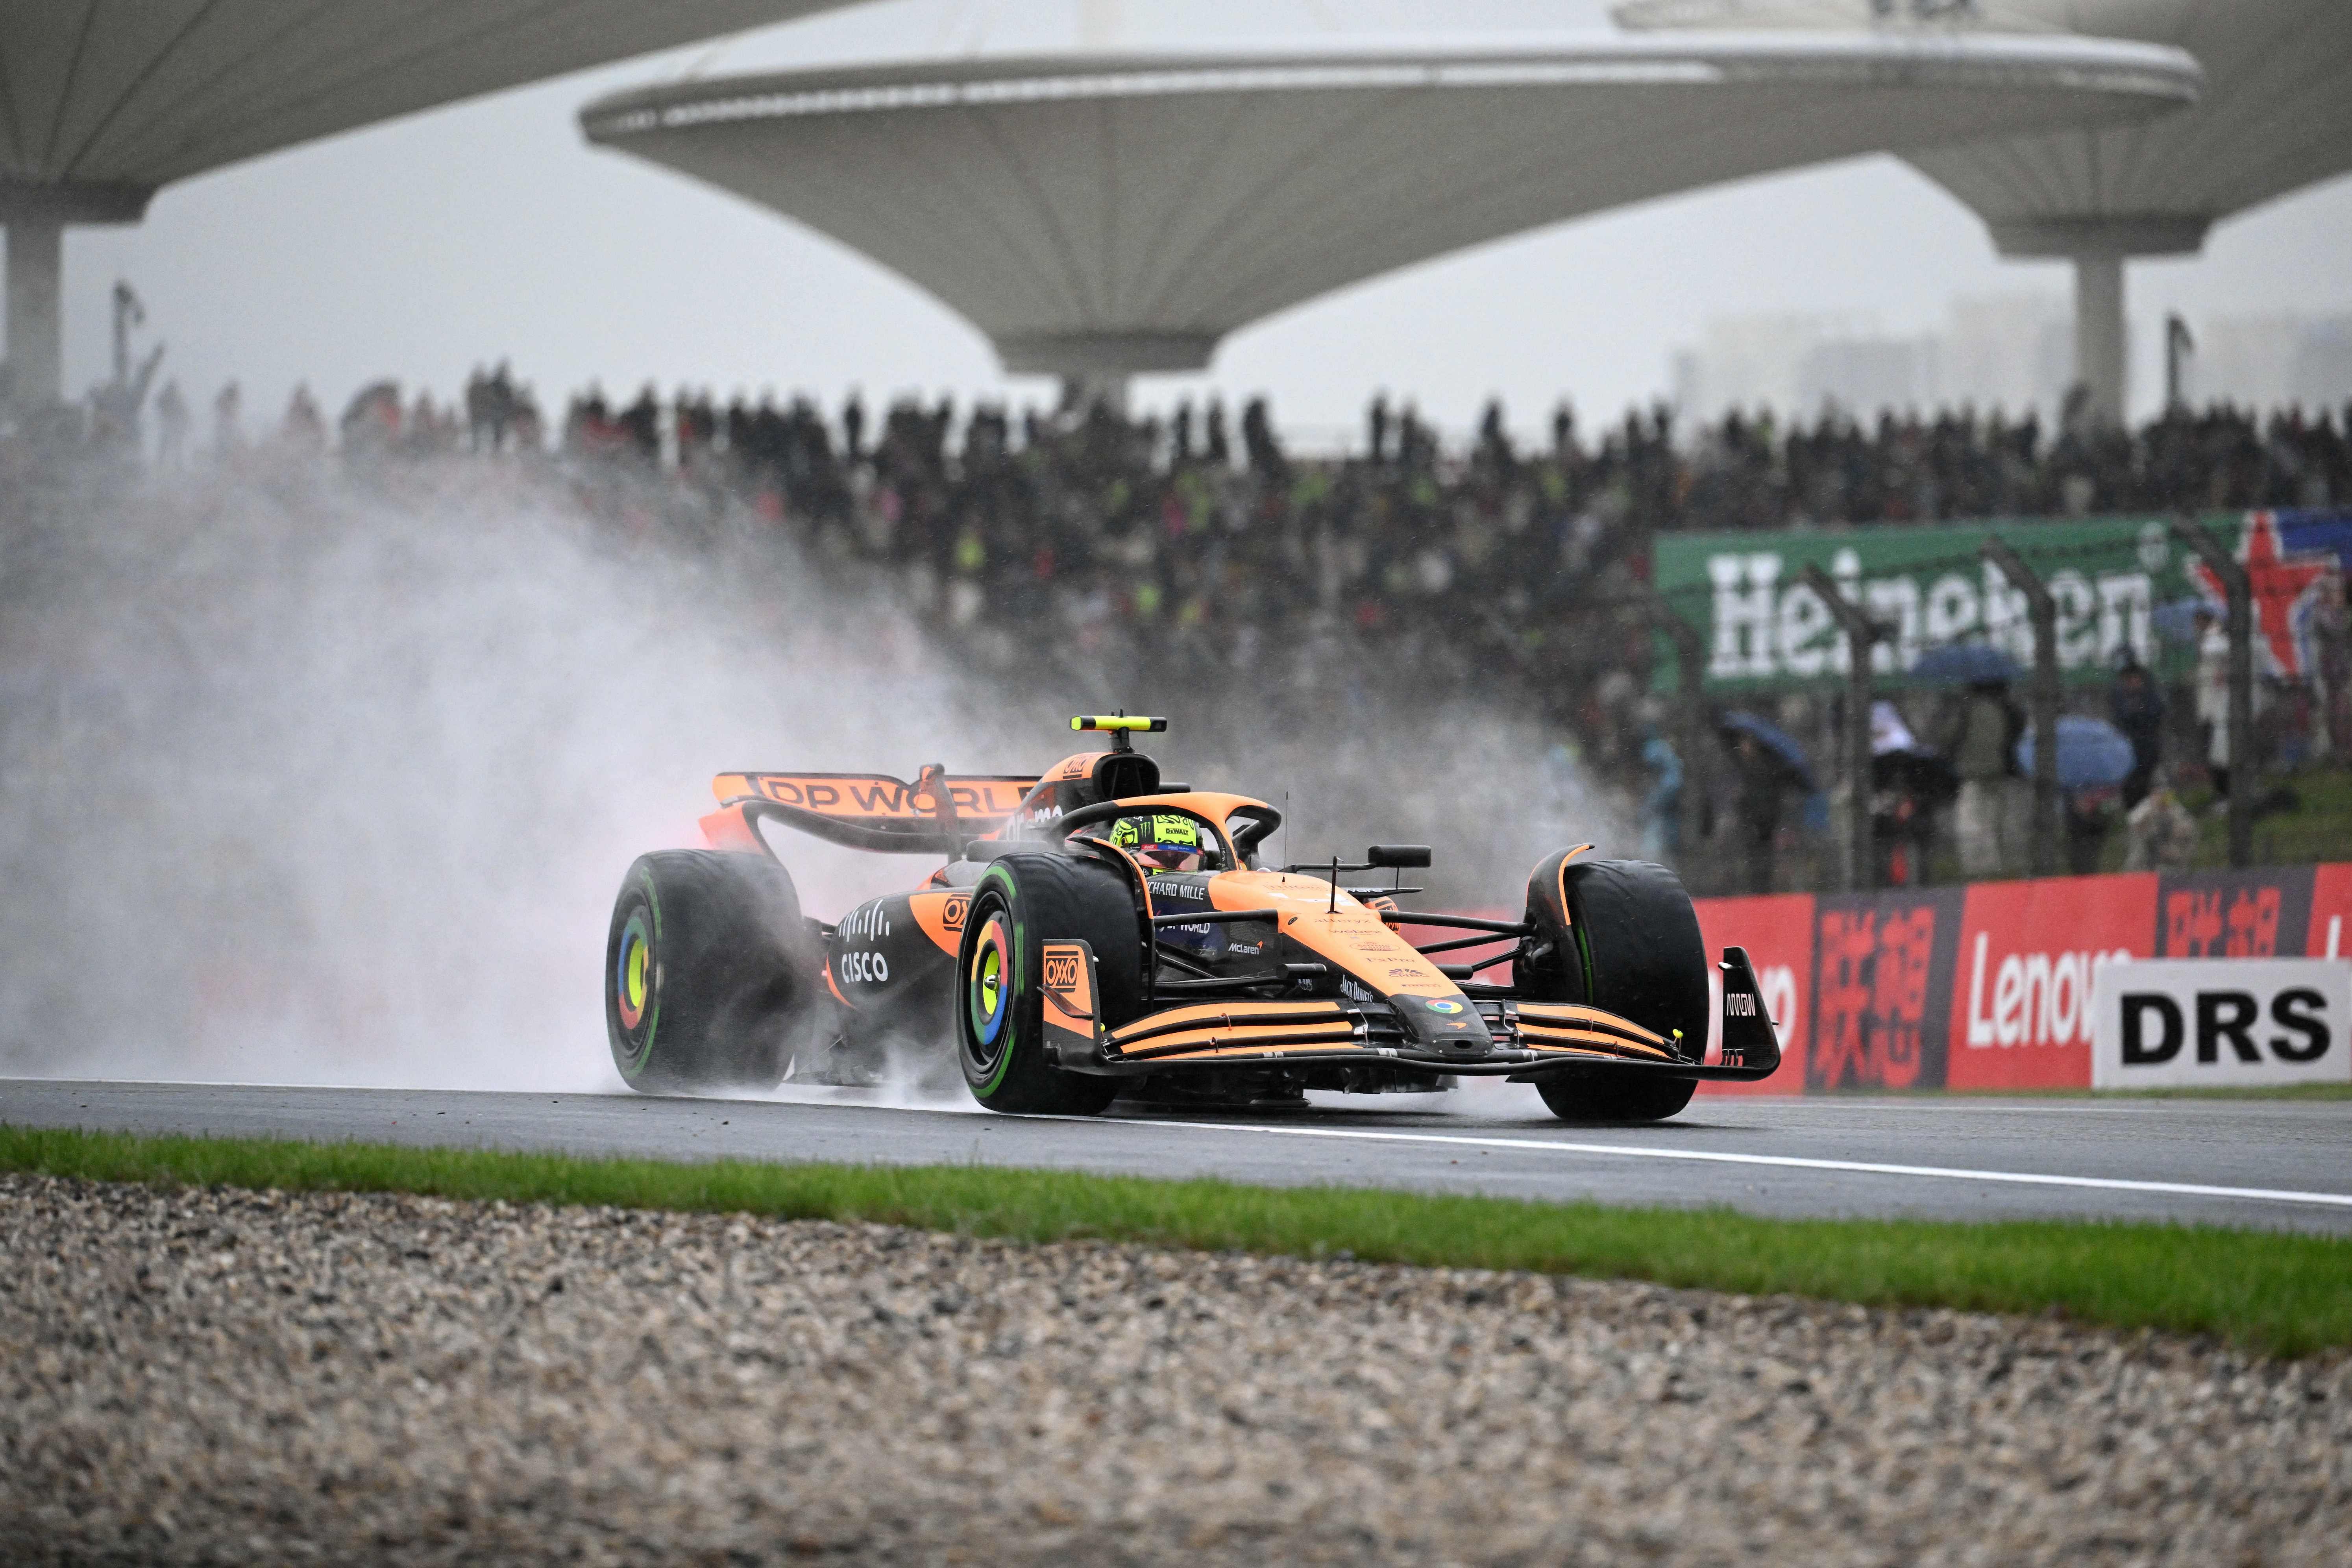 Lando Norris takes pole as rain causes chaos in Chinese GP sprint qualifying